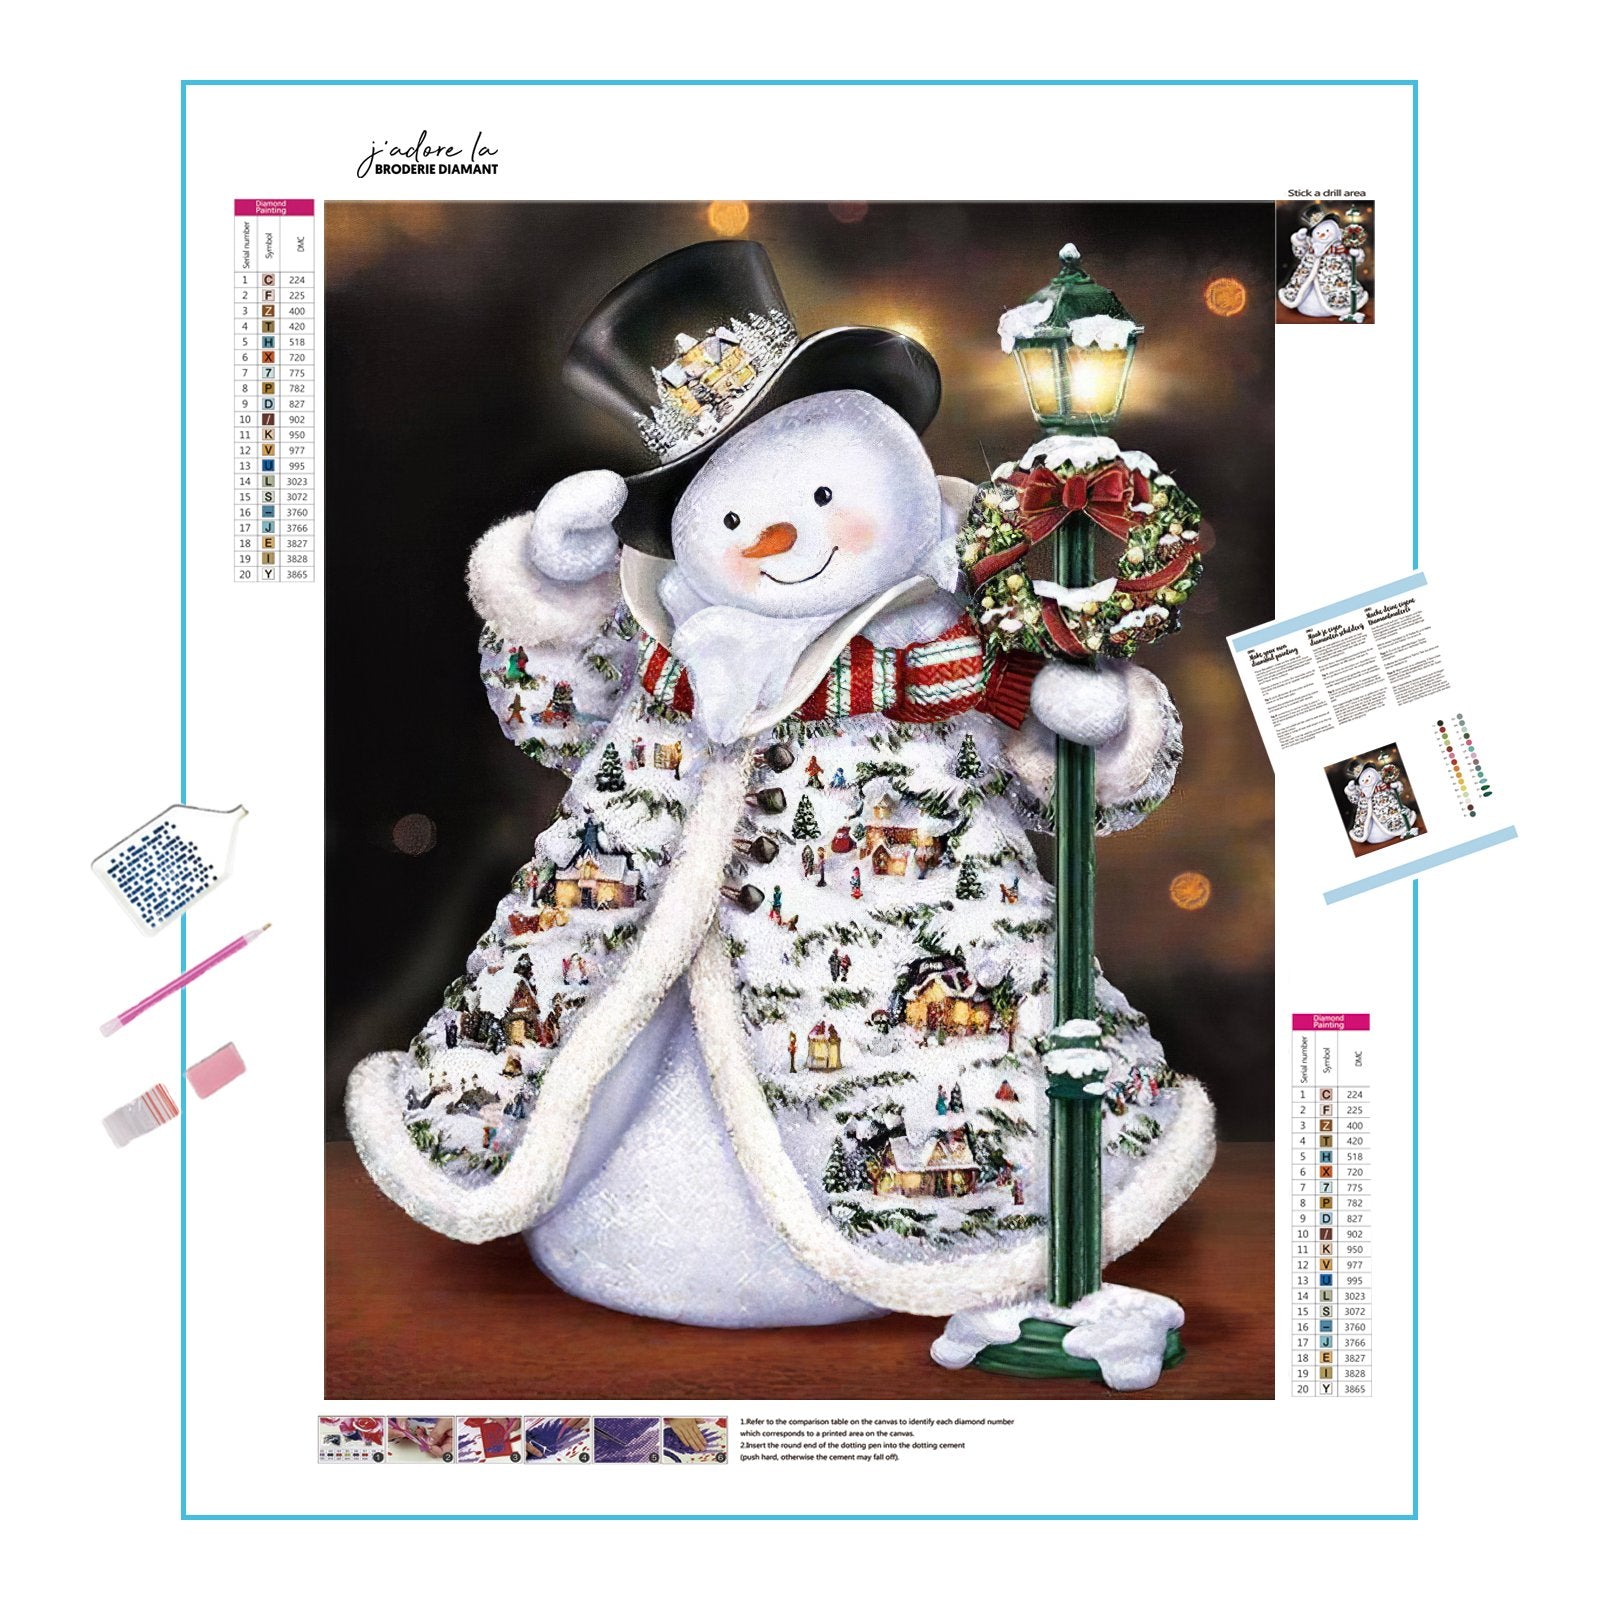 Snowman With Dress